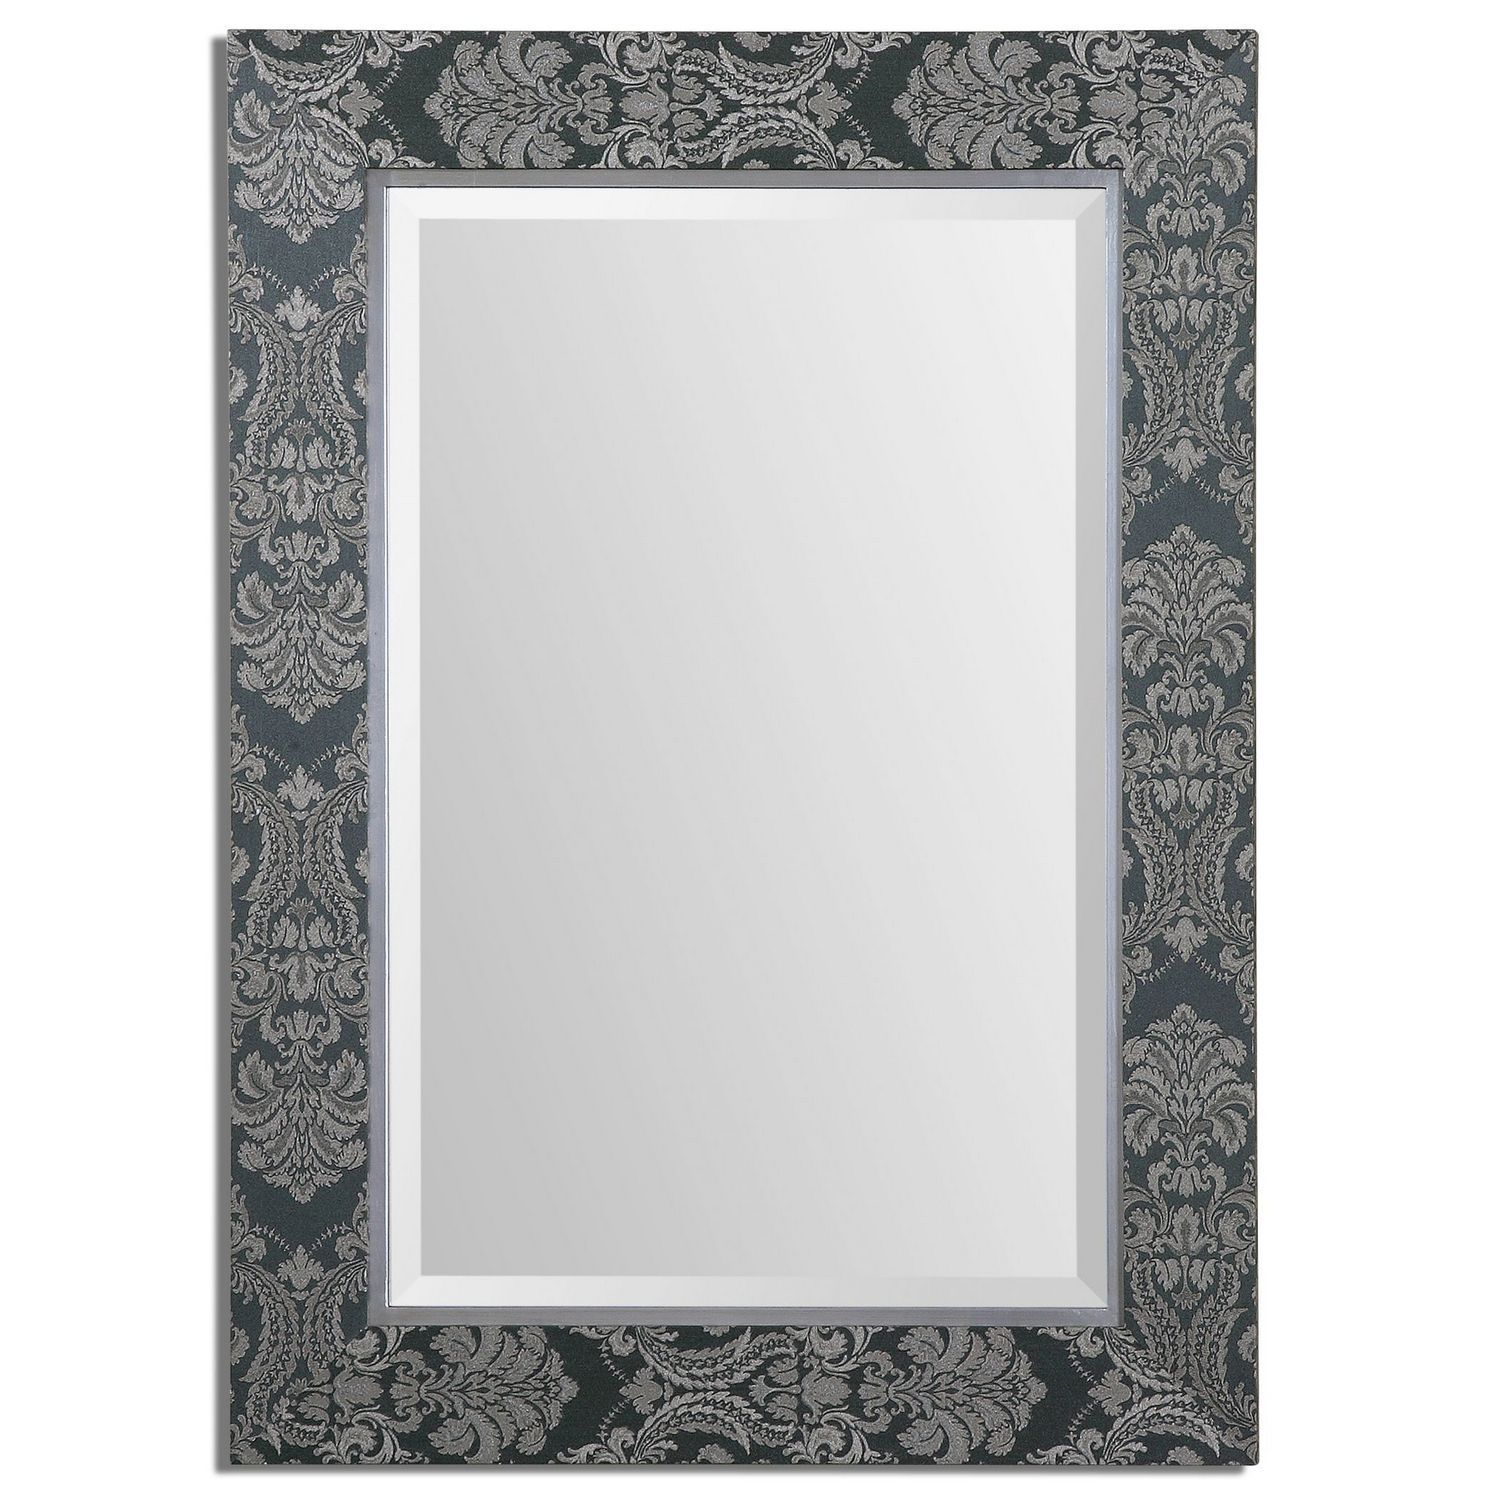 Mirror, Damask, Green, Blue, Silver, Traditional, Transitional | Modern Regarding Blue Green Wall Mirrors (View 6 of 15)